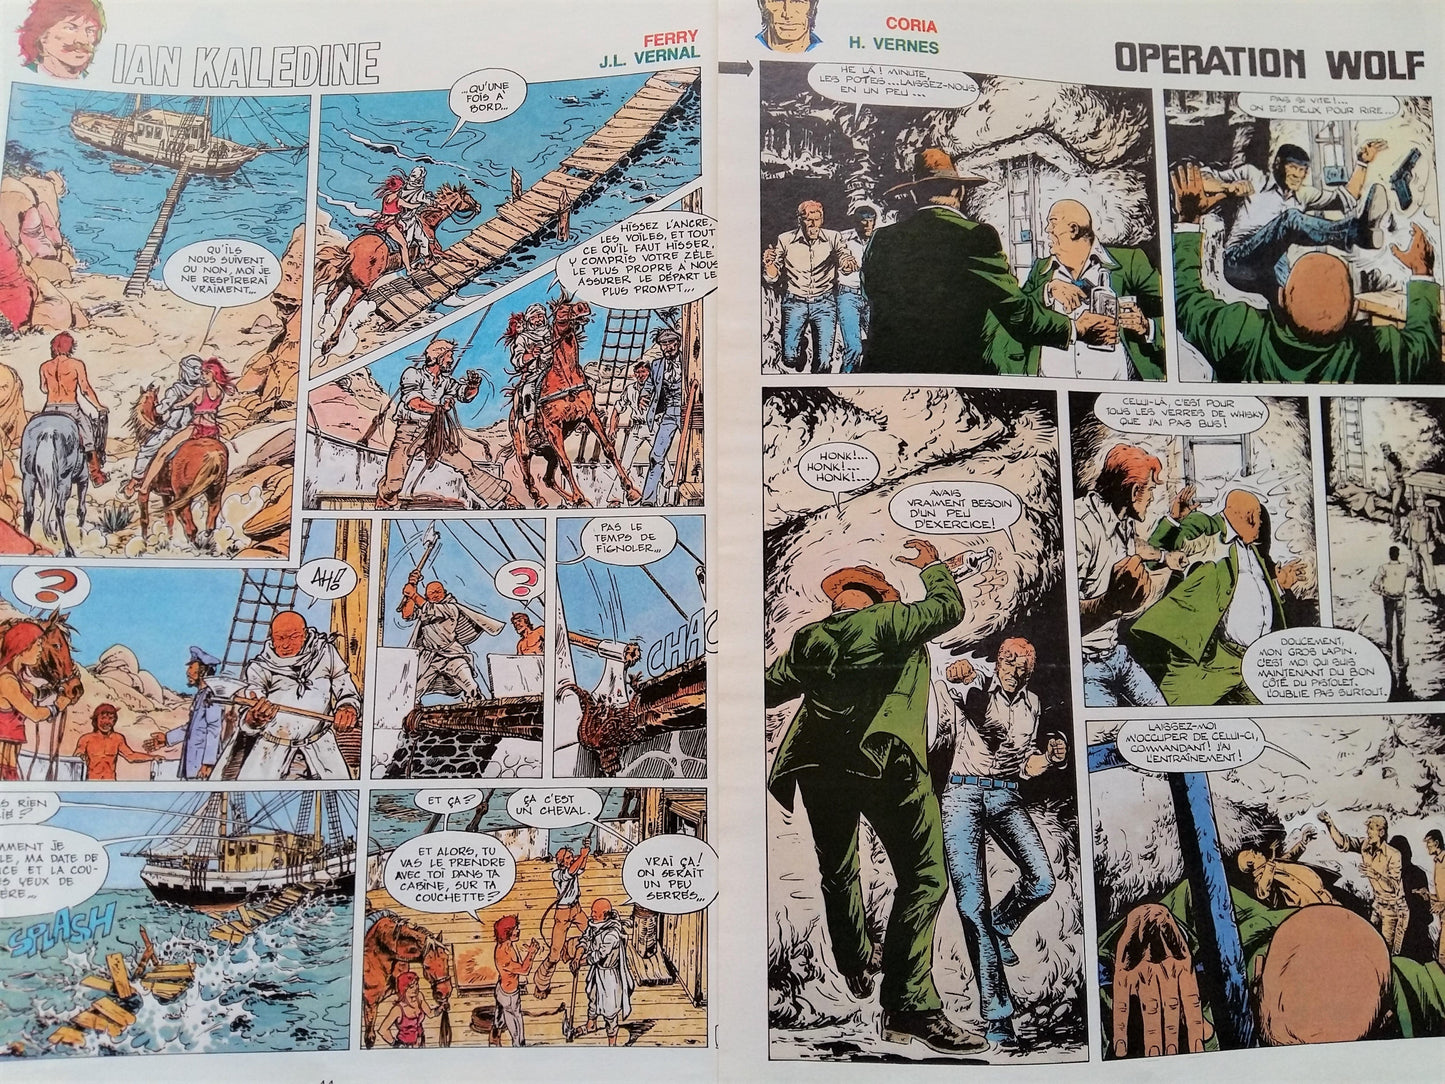 Comic Strip Ephemera Pack. 100+ French, Bande Dessinée Pages from Old Tintin Magazines. from Tiggy & Pip - €35.00! Shop now at Tiggy and Pip